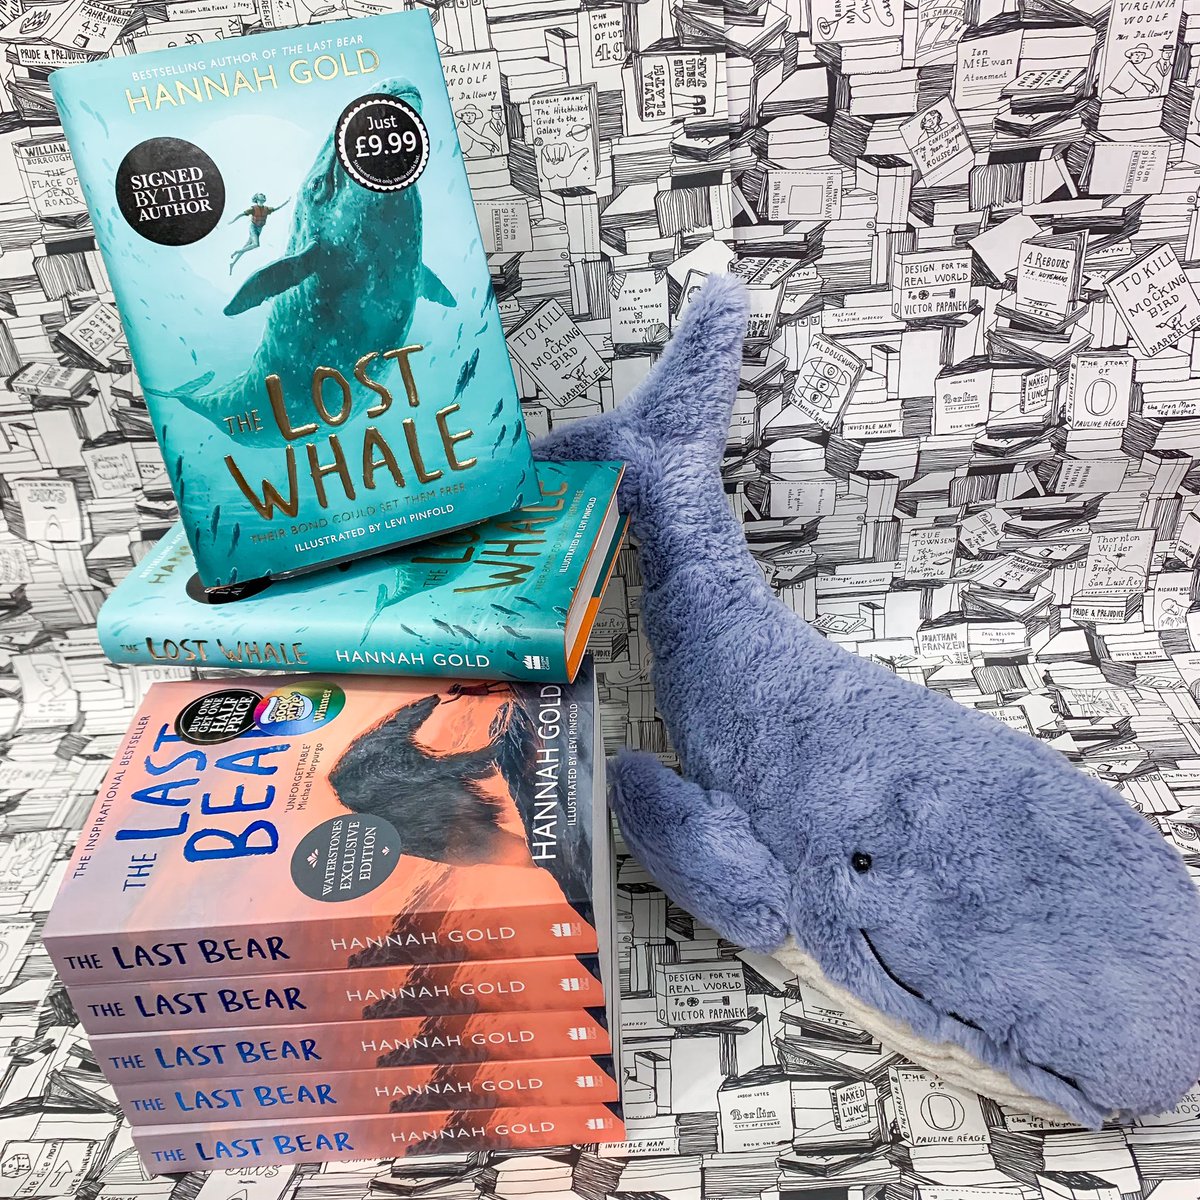 The Lost Whale by Hannah Gold 🐋… the brand new book from the author of the Waterstones Children’s Book Prize Overall Winner 2022, The Last Bear! 🐻‍❄️⁣
⁣
#bibliophile #hannahgold #thelastbear #thelostwhale #WCBP22 #waterstones #booktwt